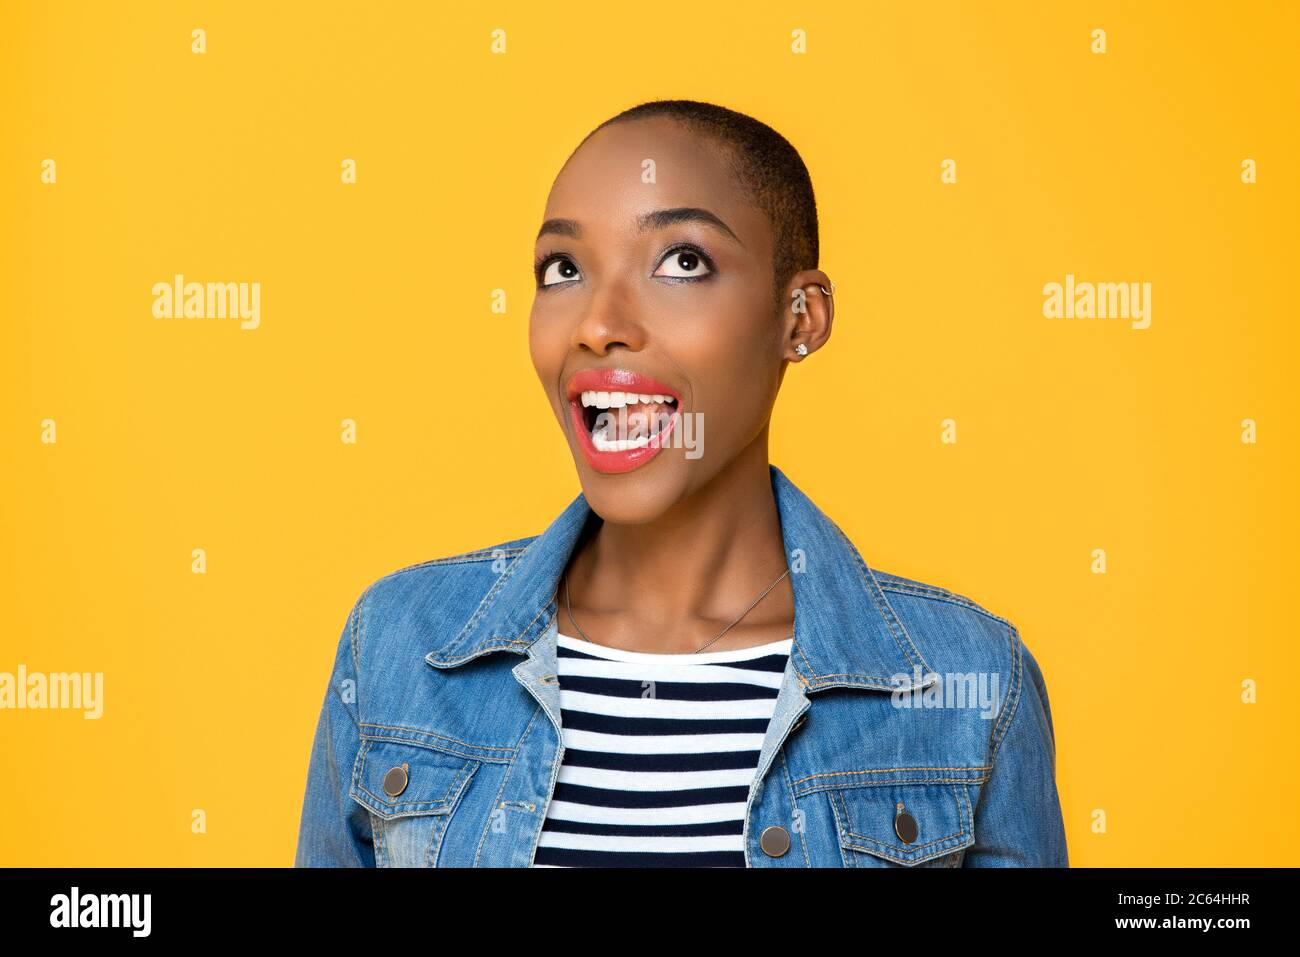 Close up portrait of happy young African American woman rolling her eyes looking up with mouth open in isolated studio yellow background Stock Photo